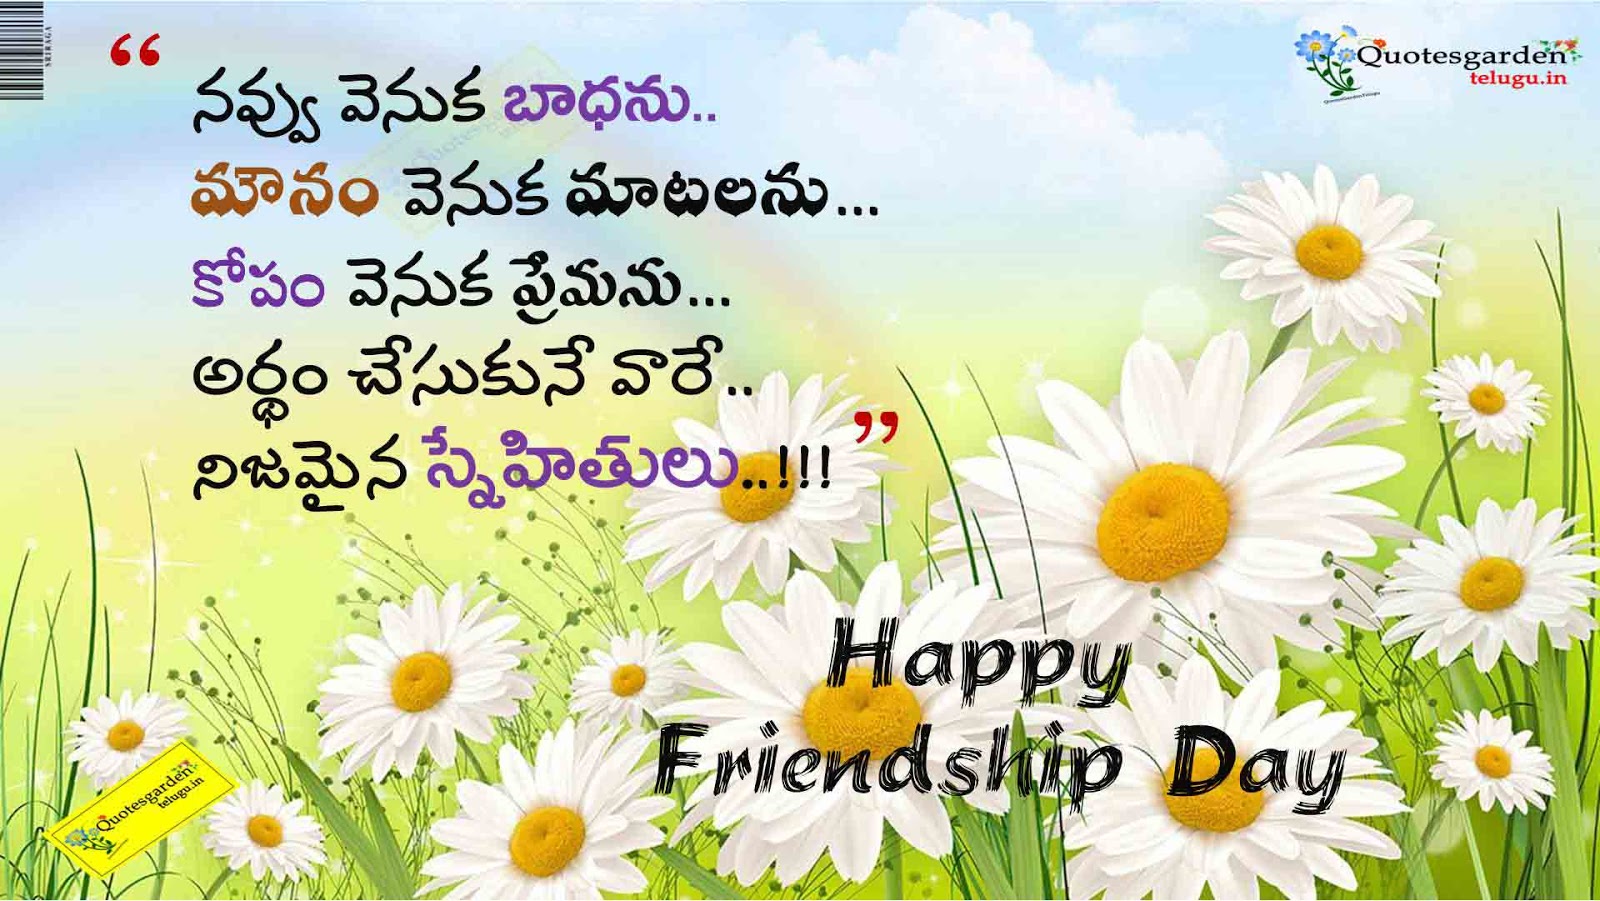 Nice Top friendship day quotes in telugu 770 | QUOTES GARDEN ...